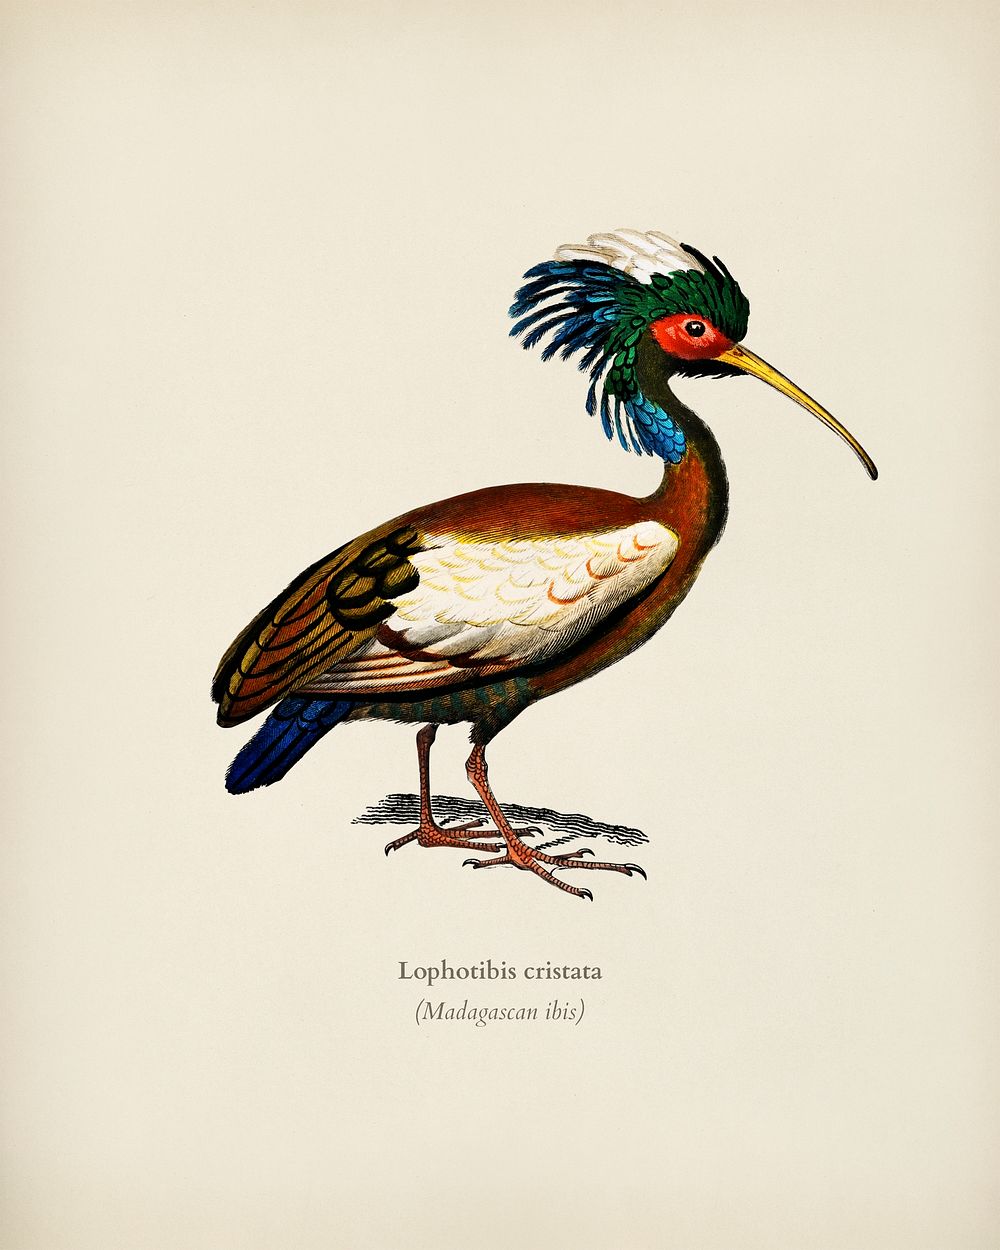 Madagascan ibis (Lophotibis cristata) illustrated by Charles Dessalines D' Orbigny (1806-1876). Digitally enhanced from our…